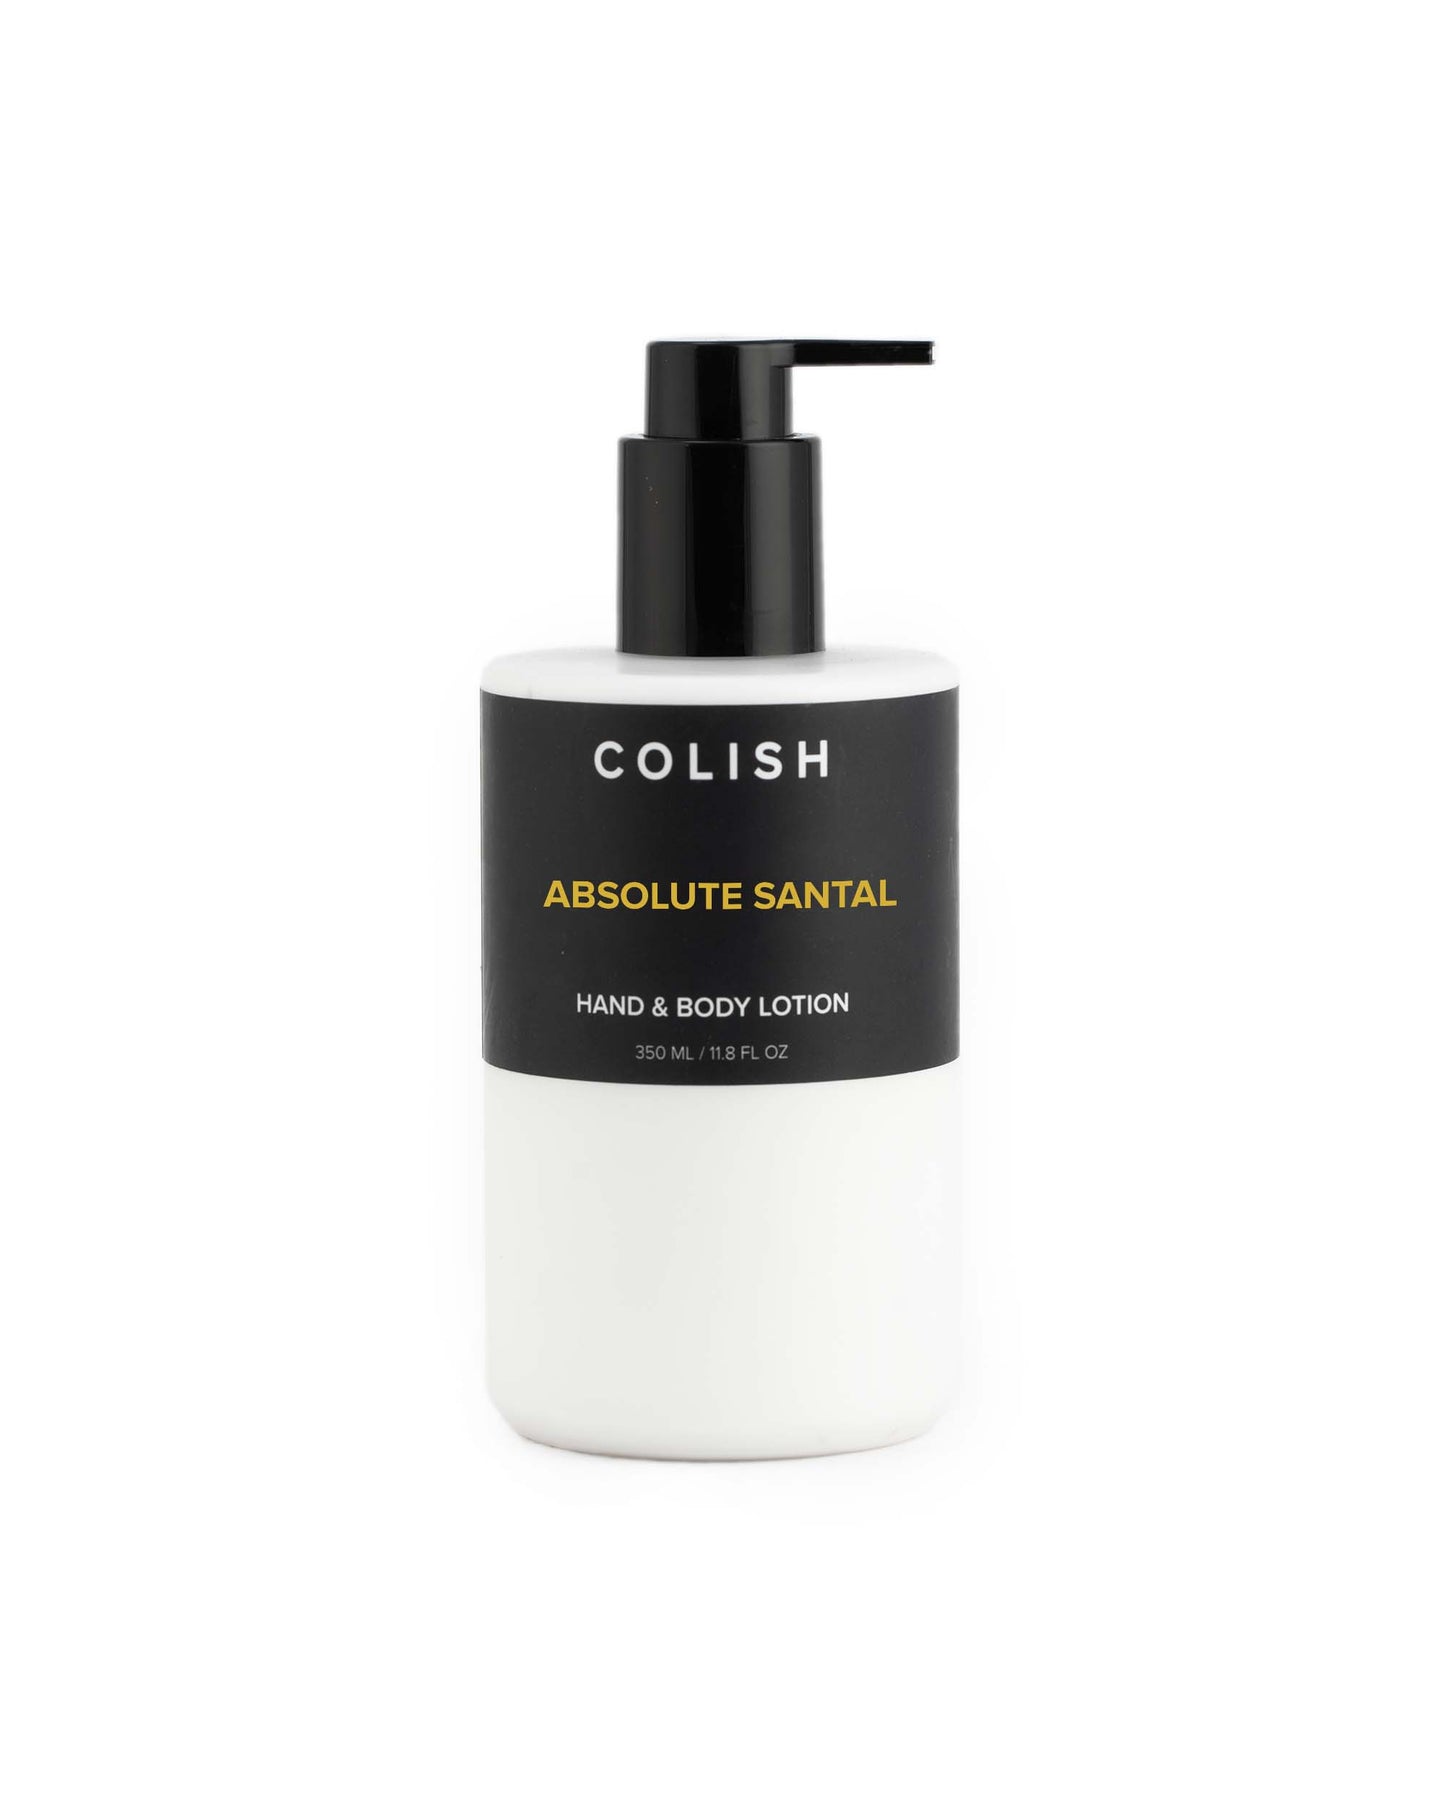 ABSOLUTE SANTAL HAND & BODY LOTION